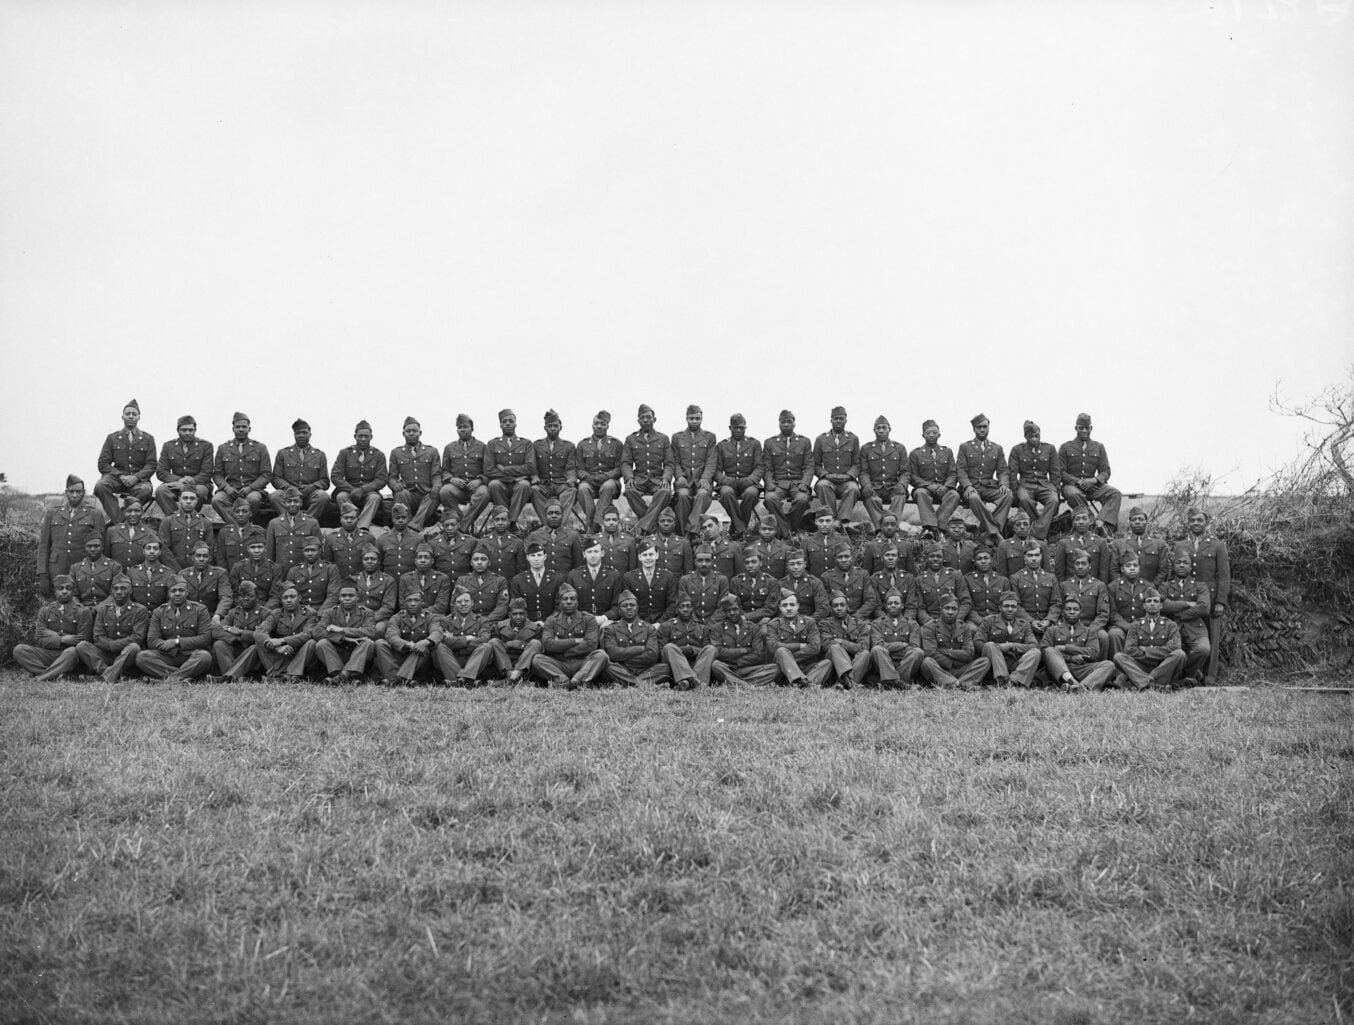 Large group of Black GIs lined up in rows for an official photograph in an English field. White commanding officers are in the centre of the rows.